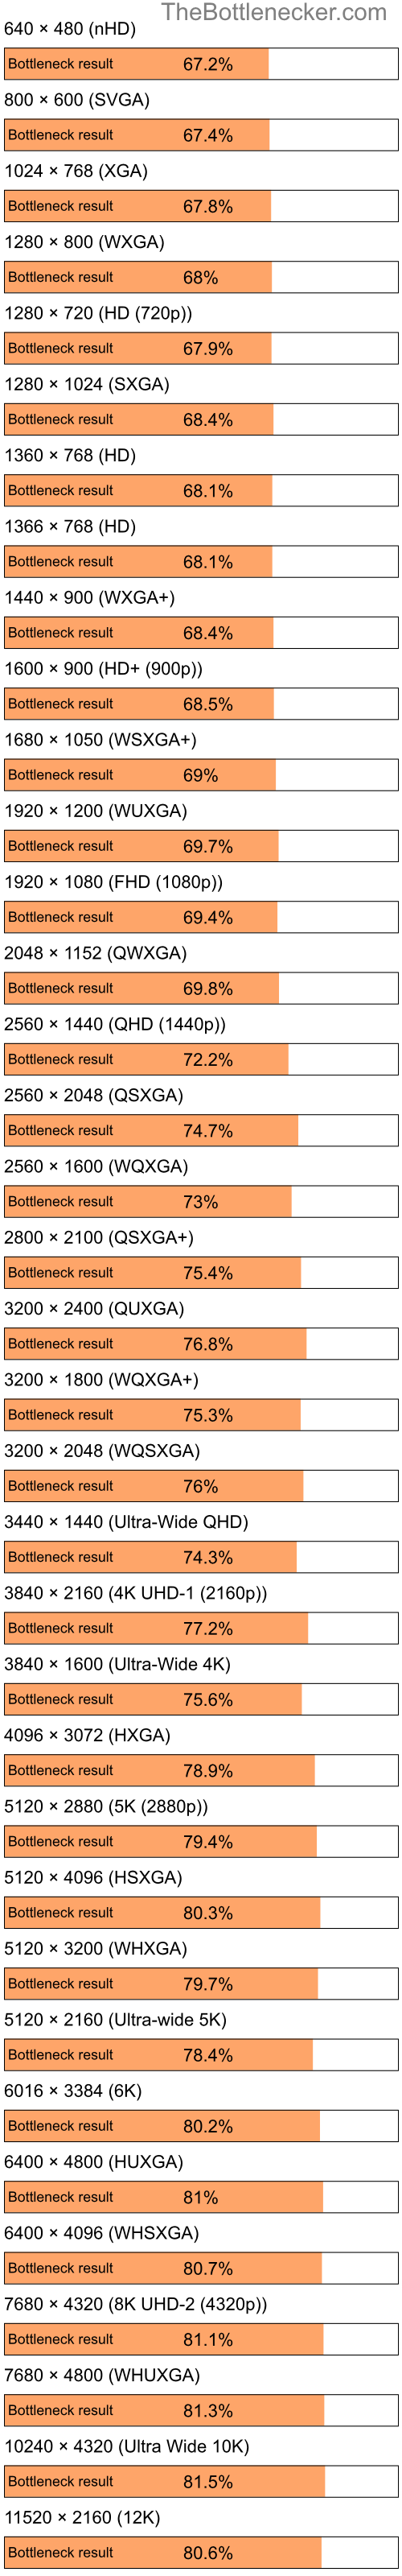 Bottleneck results by resolution for Intel Atom N280 and AMD Mobility Radeon X600 in Processor Intense Tasks